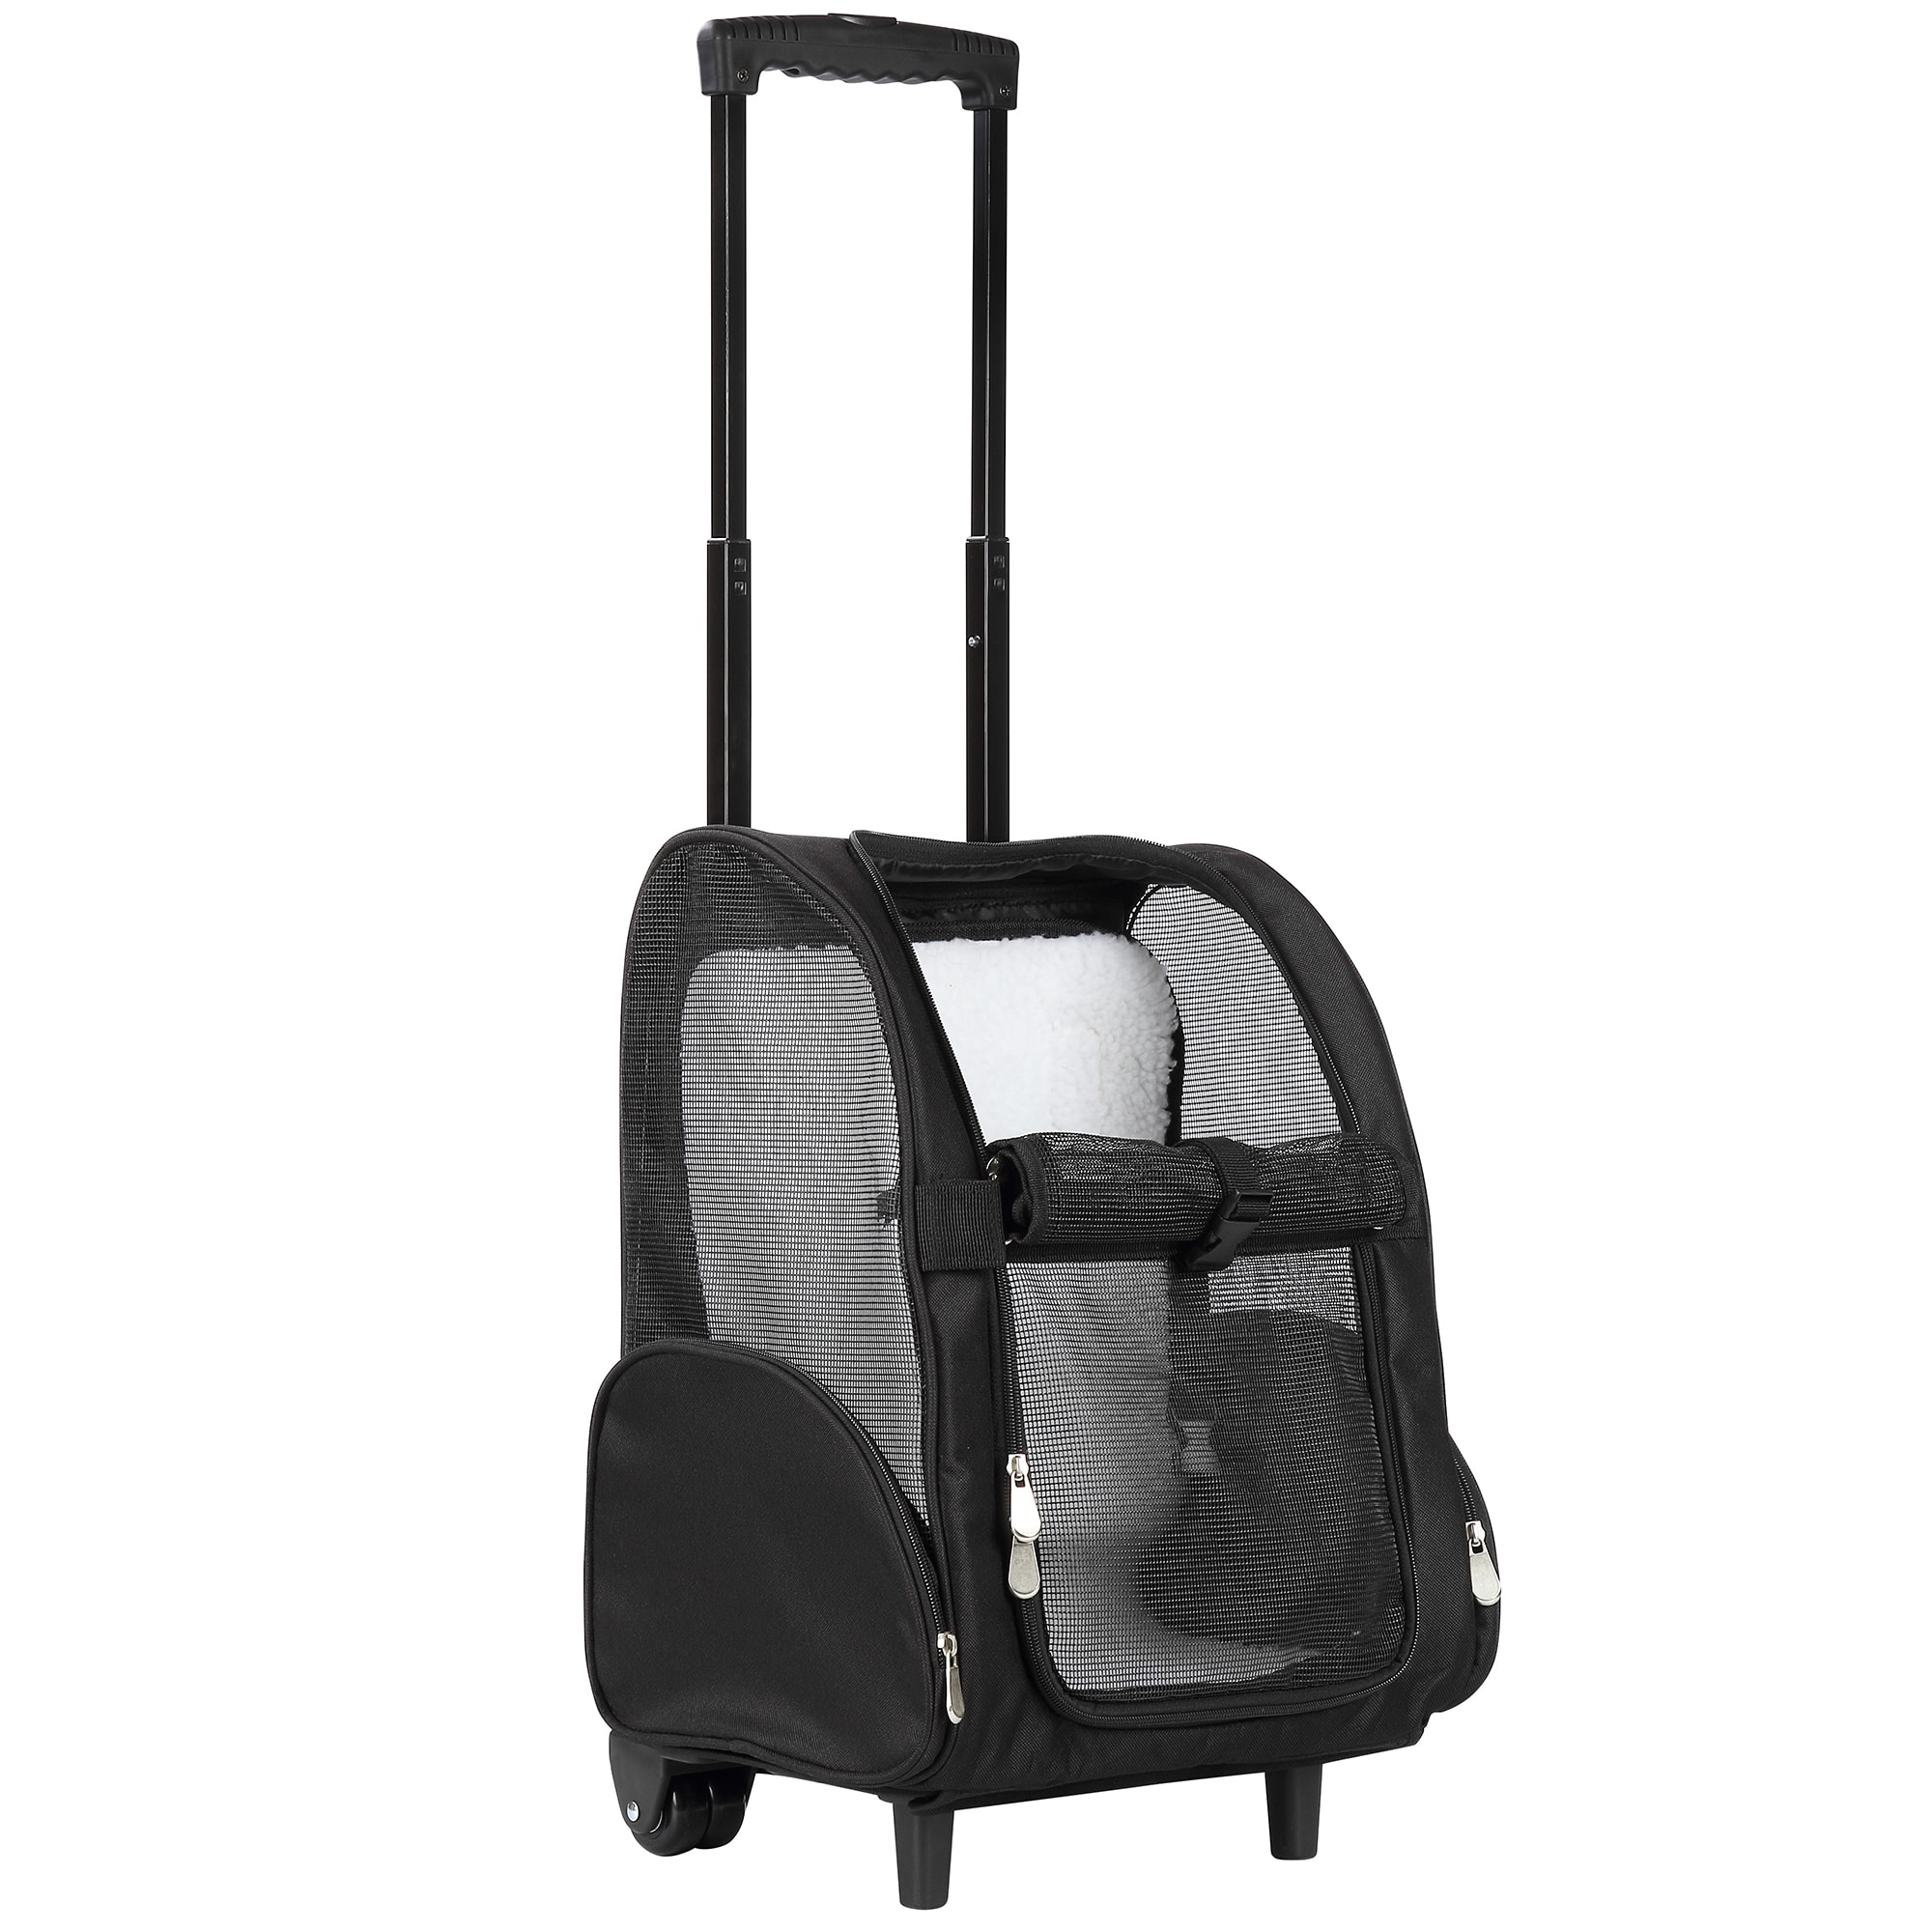 Black Deluxe Backpack Pet Travel Carrier with Double Wheels Approved by Most Airlines 